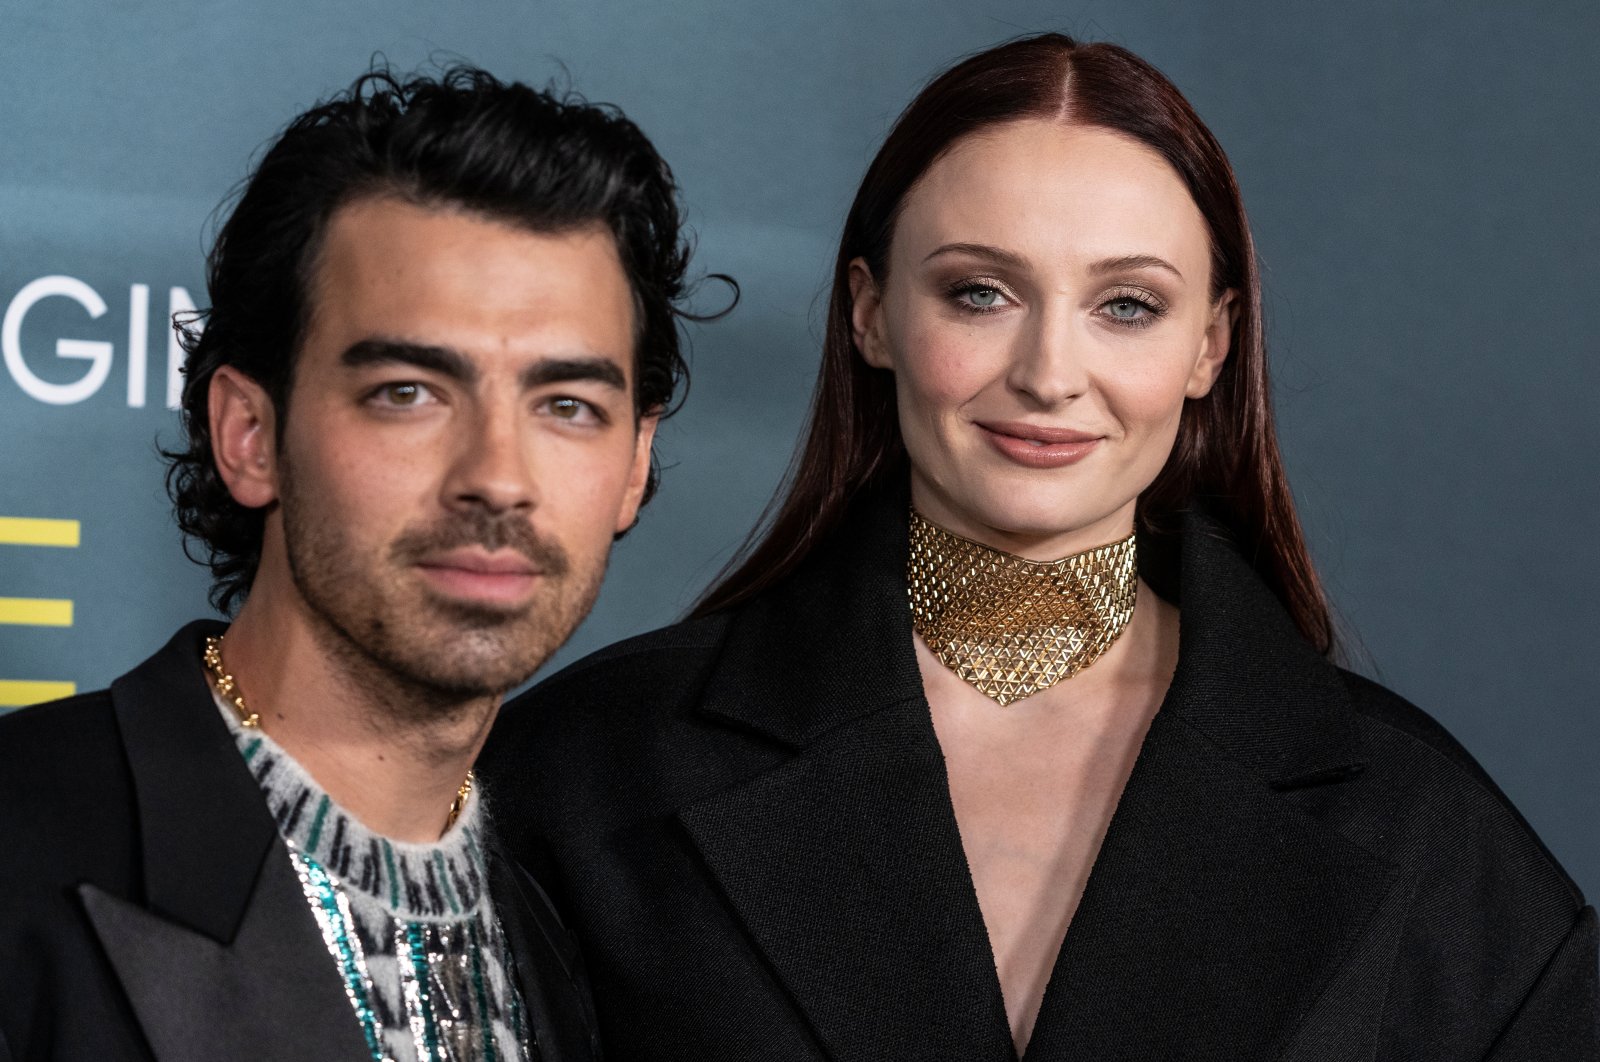 Joe Jonas and Sophie Turner wearing a dress by Louis Vuitton attend &quot;The Staircase&quot; TV show premiere at MoMA, New York, U.S., May 3, 2022. (Shutterstock Photo)